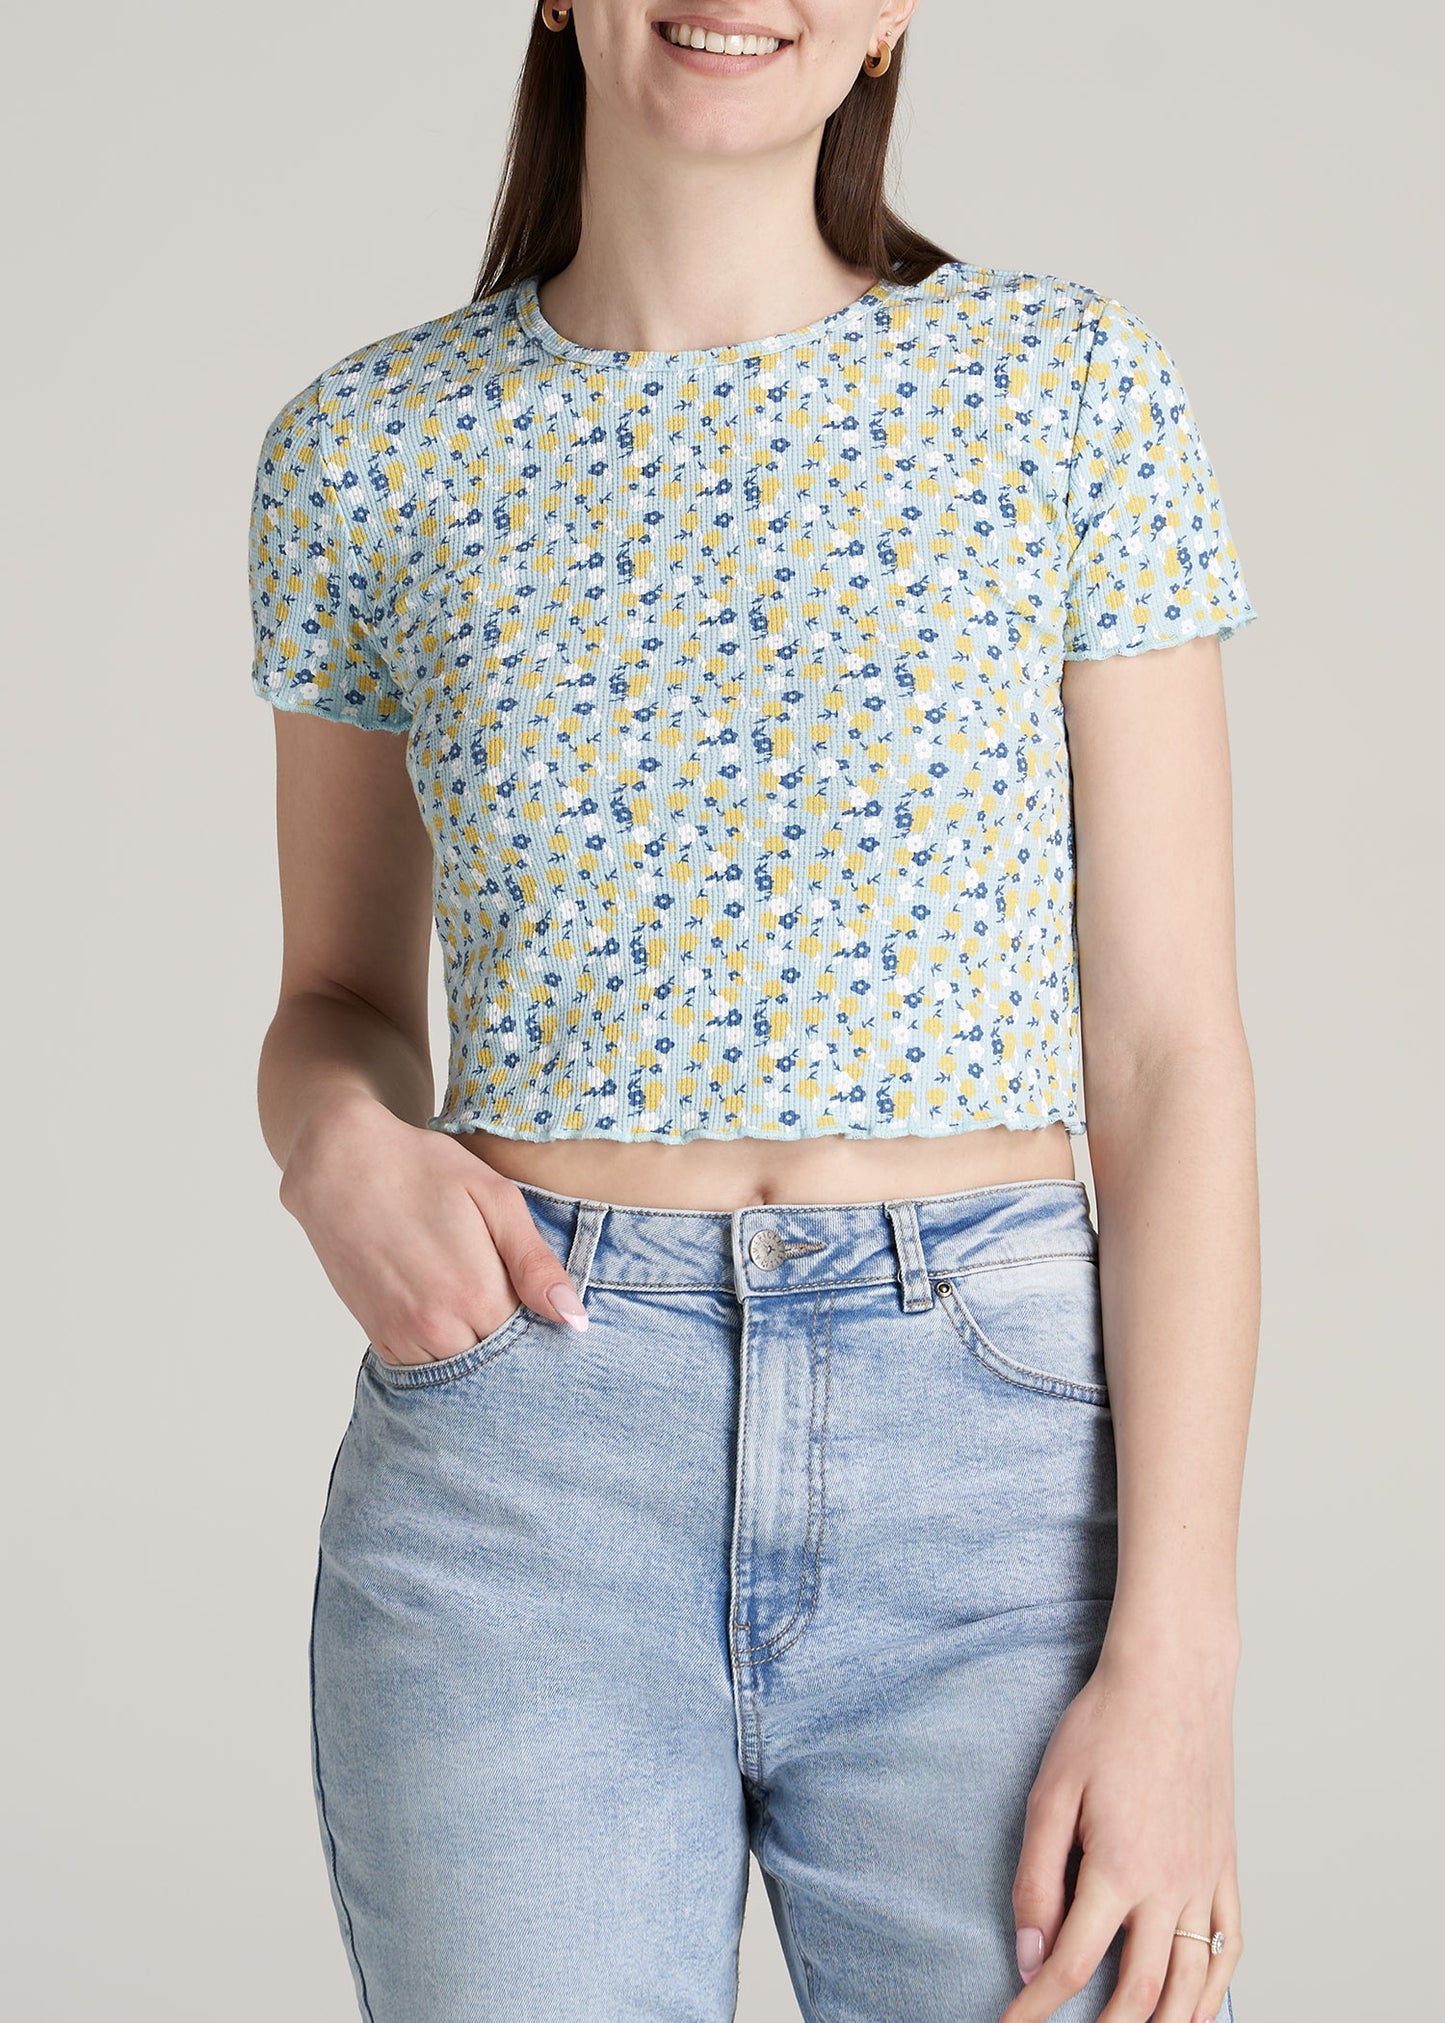 Women's Tall Cropped Waffle Tee Corydalis Blue Floral